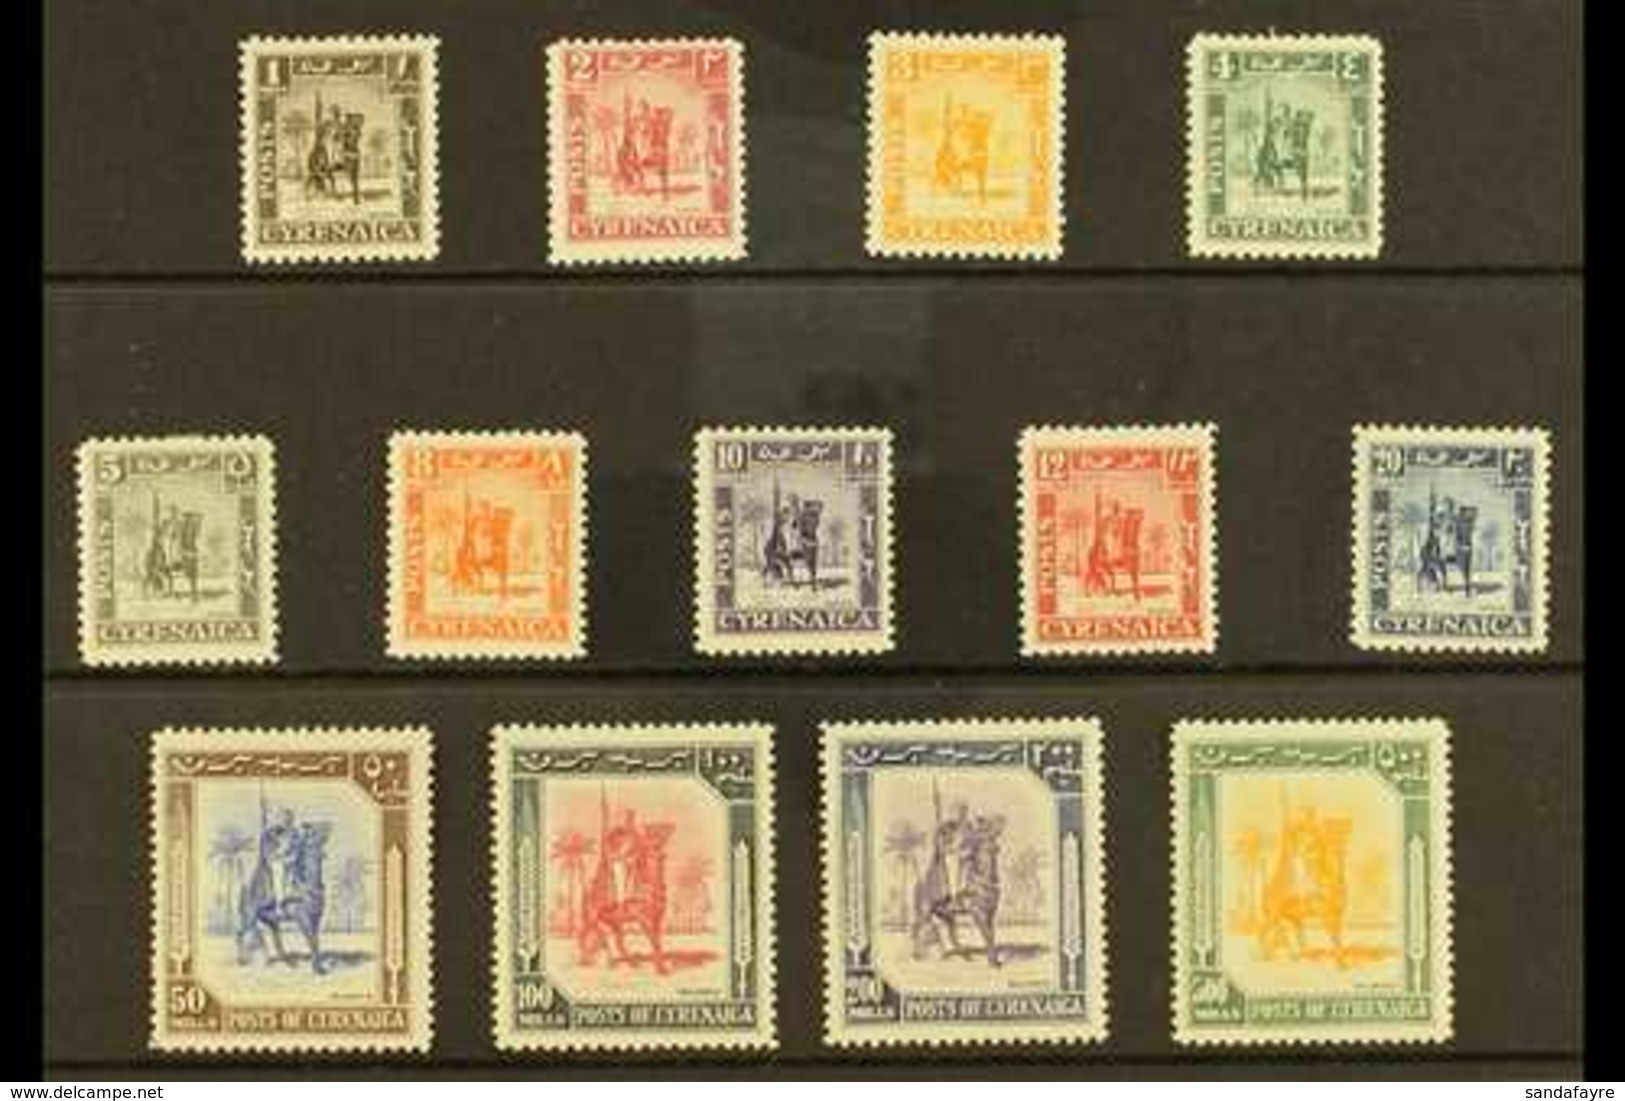 CYRENAICA 1950 "Mounted Warrior" Complete Definitive Set, SG 136/148, Very Fine Mint. (13 Stamps) For More Images, Pleas - Italienisch Ost-Afrika